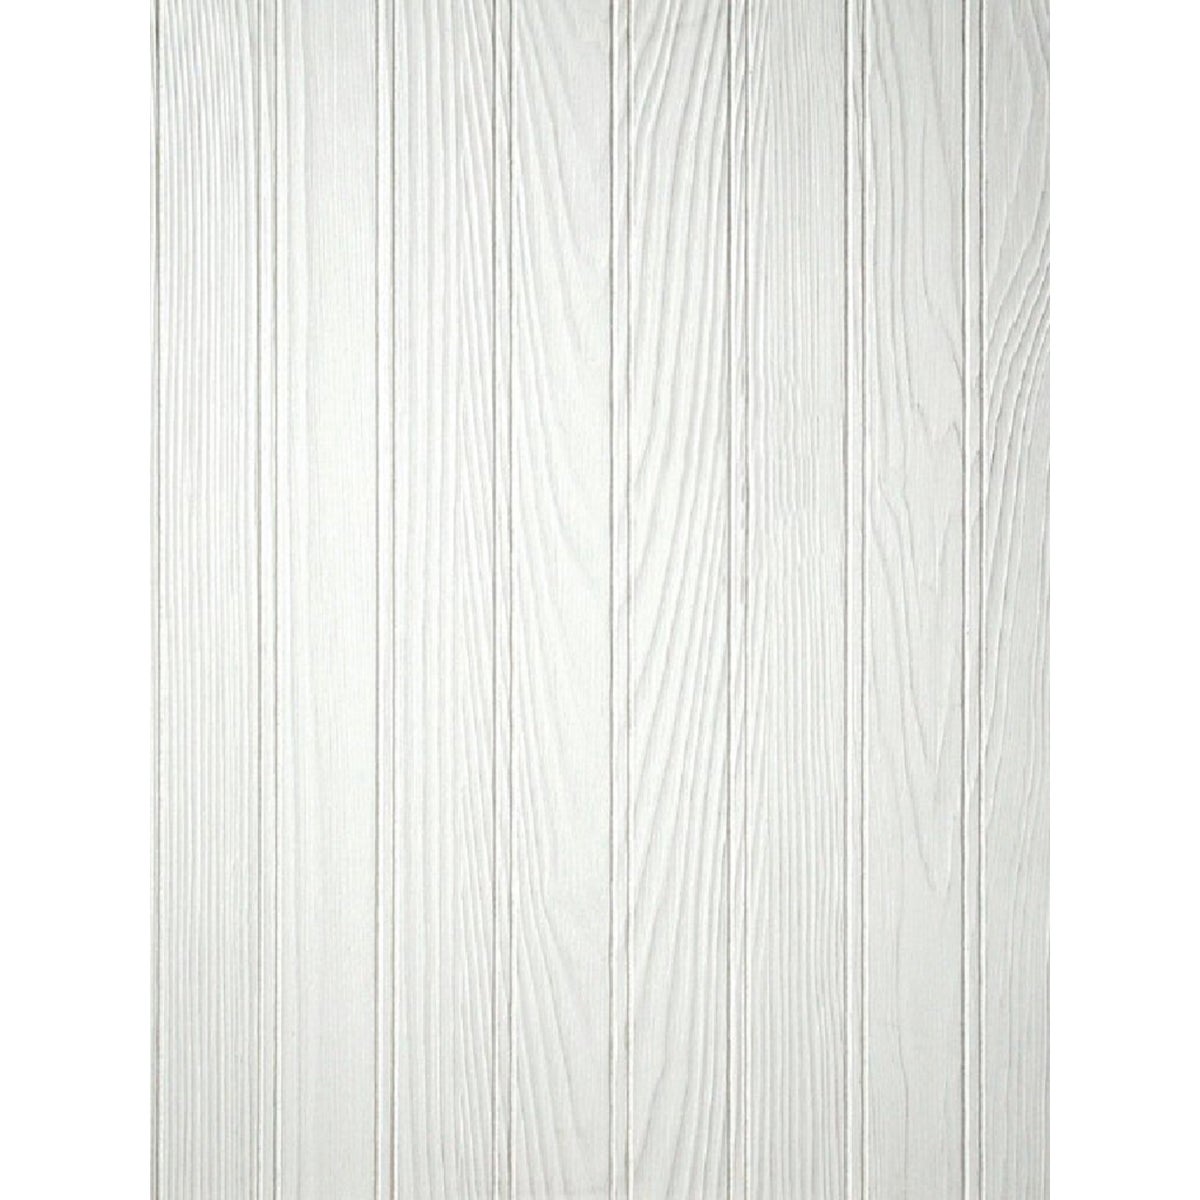 DPI 4 Ft. x 8 Ft. x 3/16 In. Paintable White Beaded Pinetex Wall Paneling